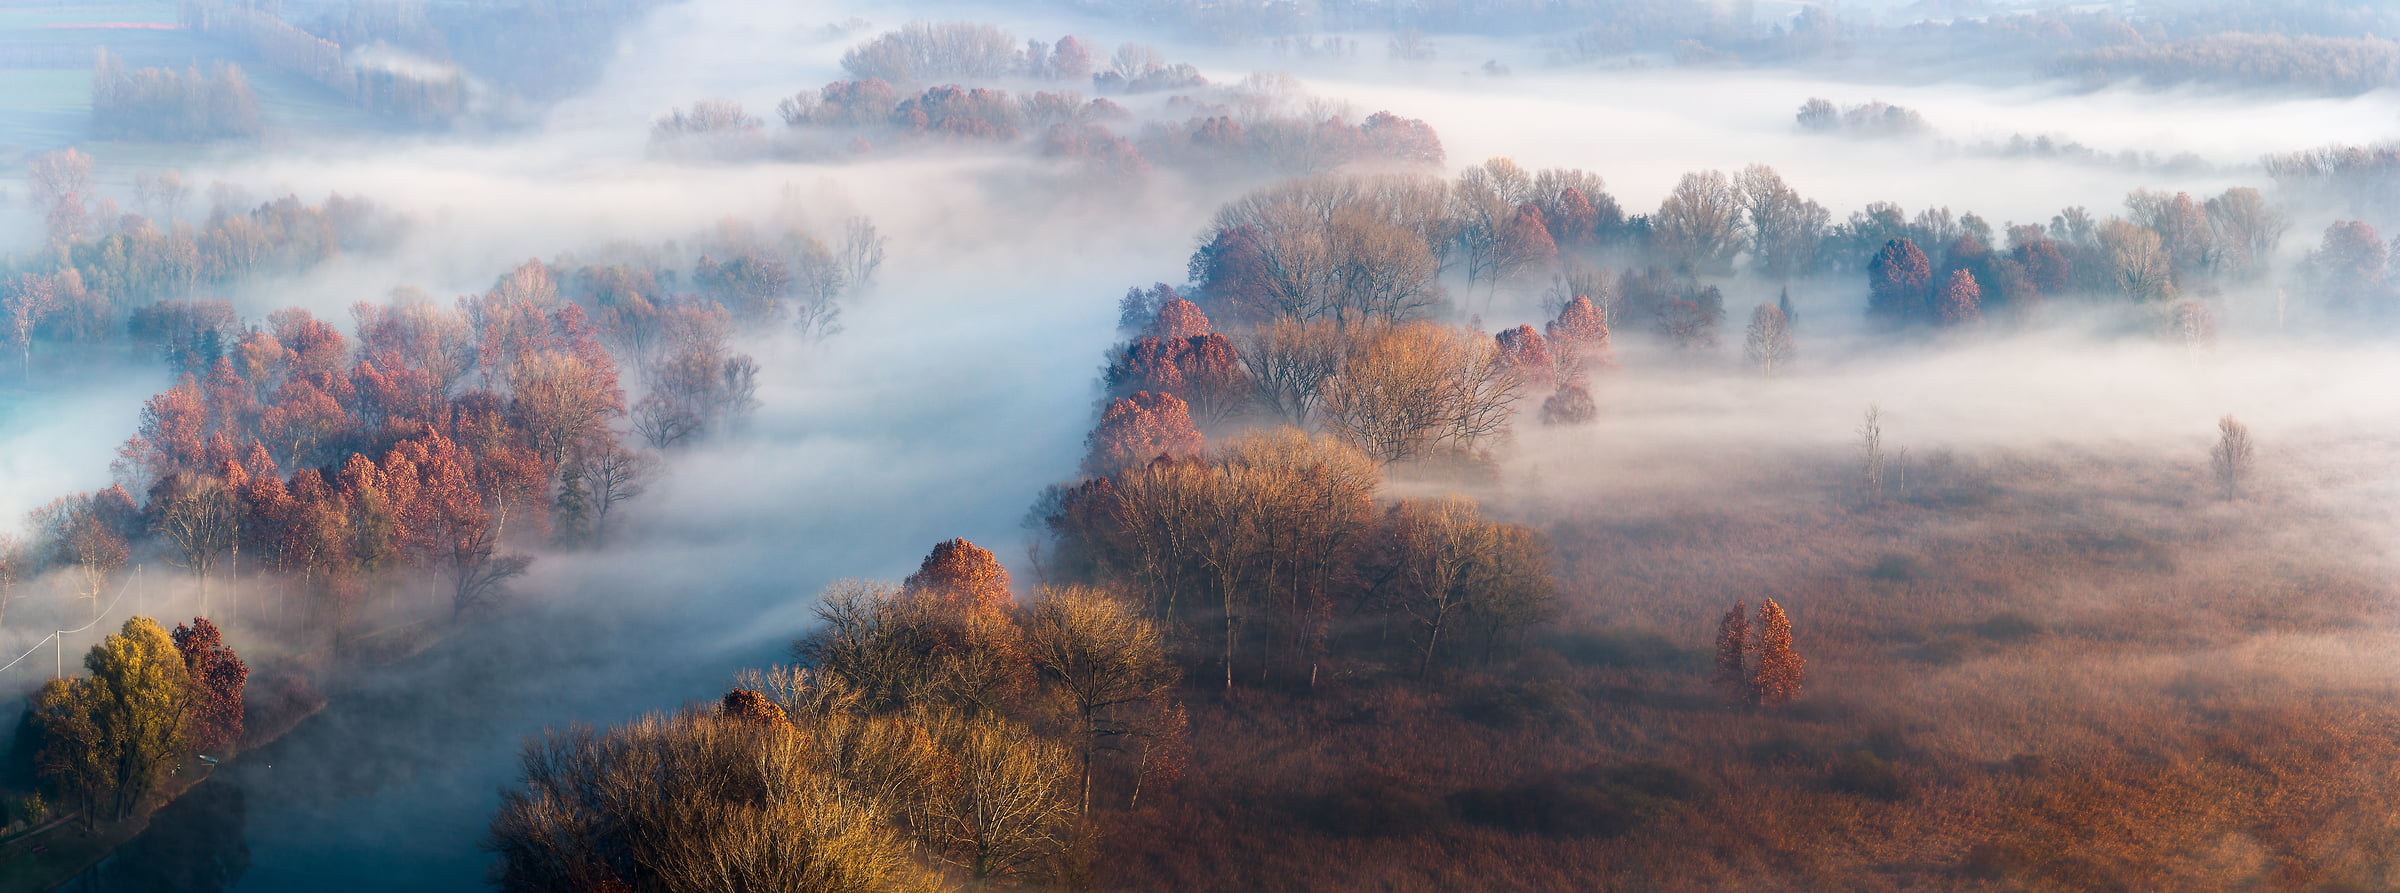 153 megapixels! A very high resolution, large-format VAST photo print of a foggy autumn scene; landscape photograph created by Ennio Pozzetti in Airuno, Lombardia, Italy.